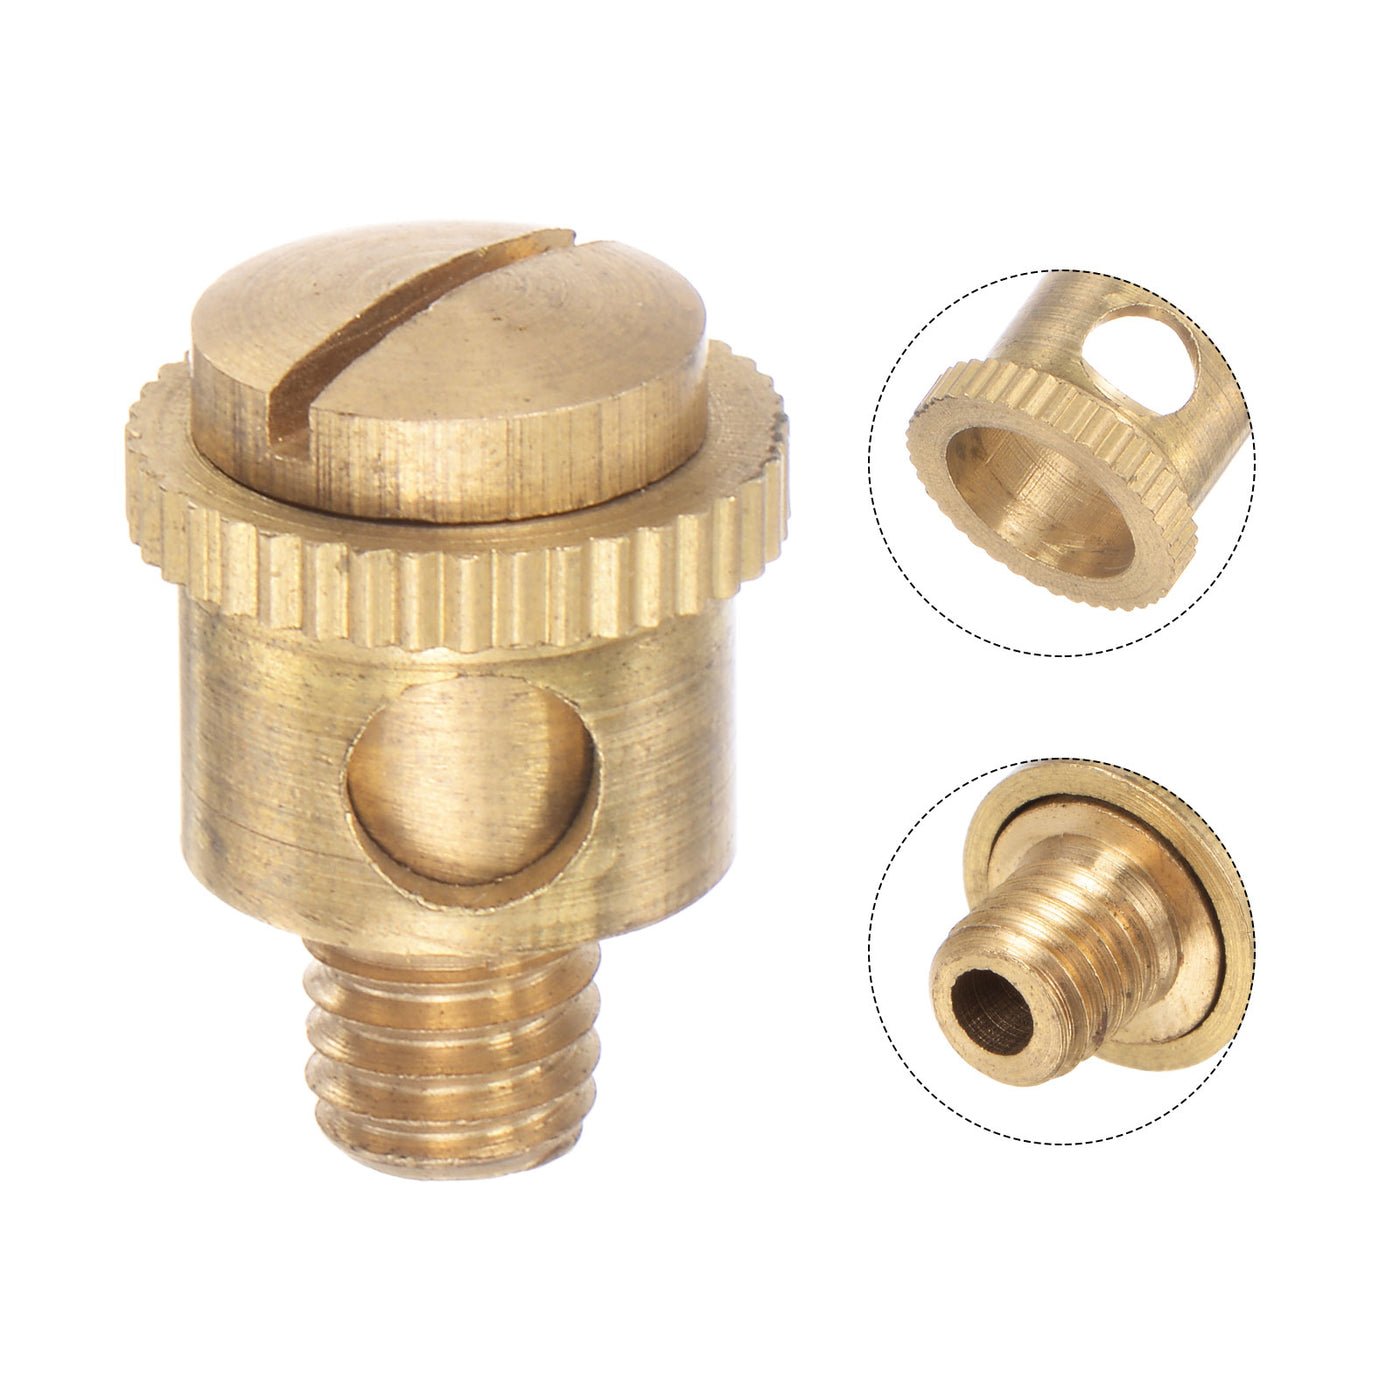 uxcell Uxcell Brass Straight Hydraulic Grease Fitting Accessories M6 x 1mm Thread, 2Pcs